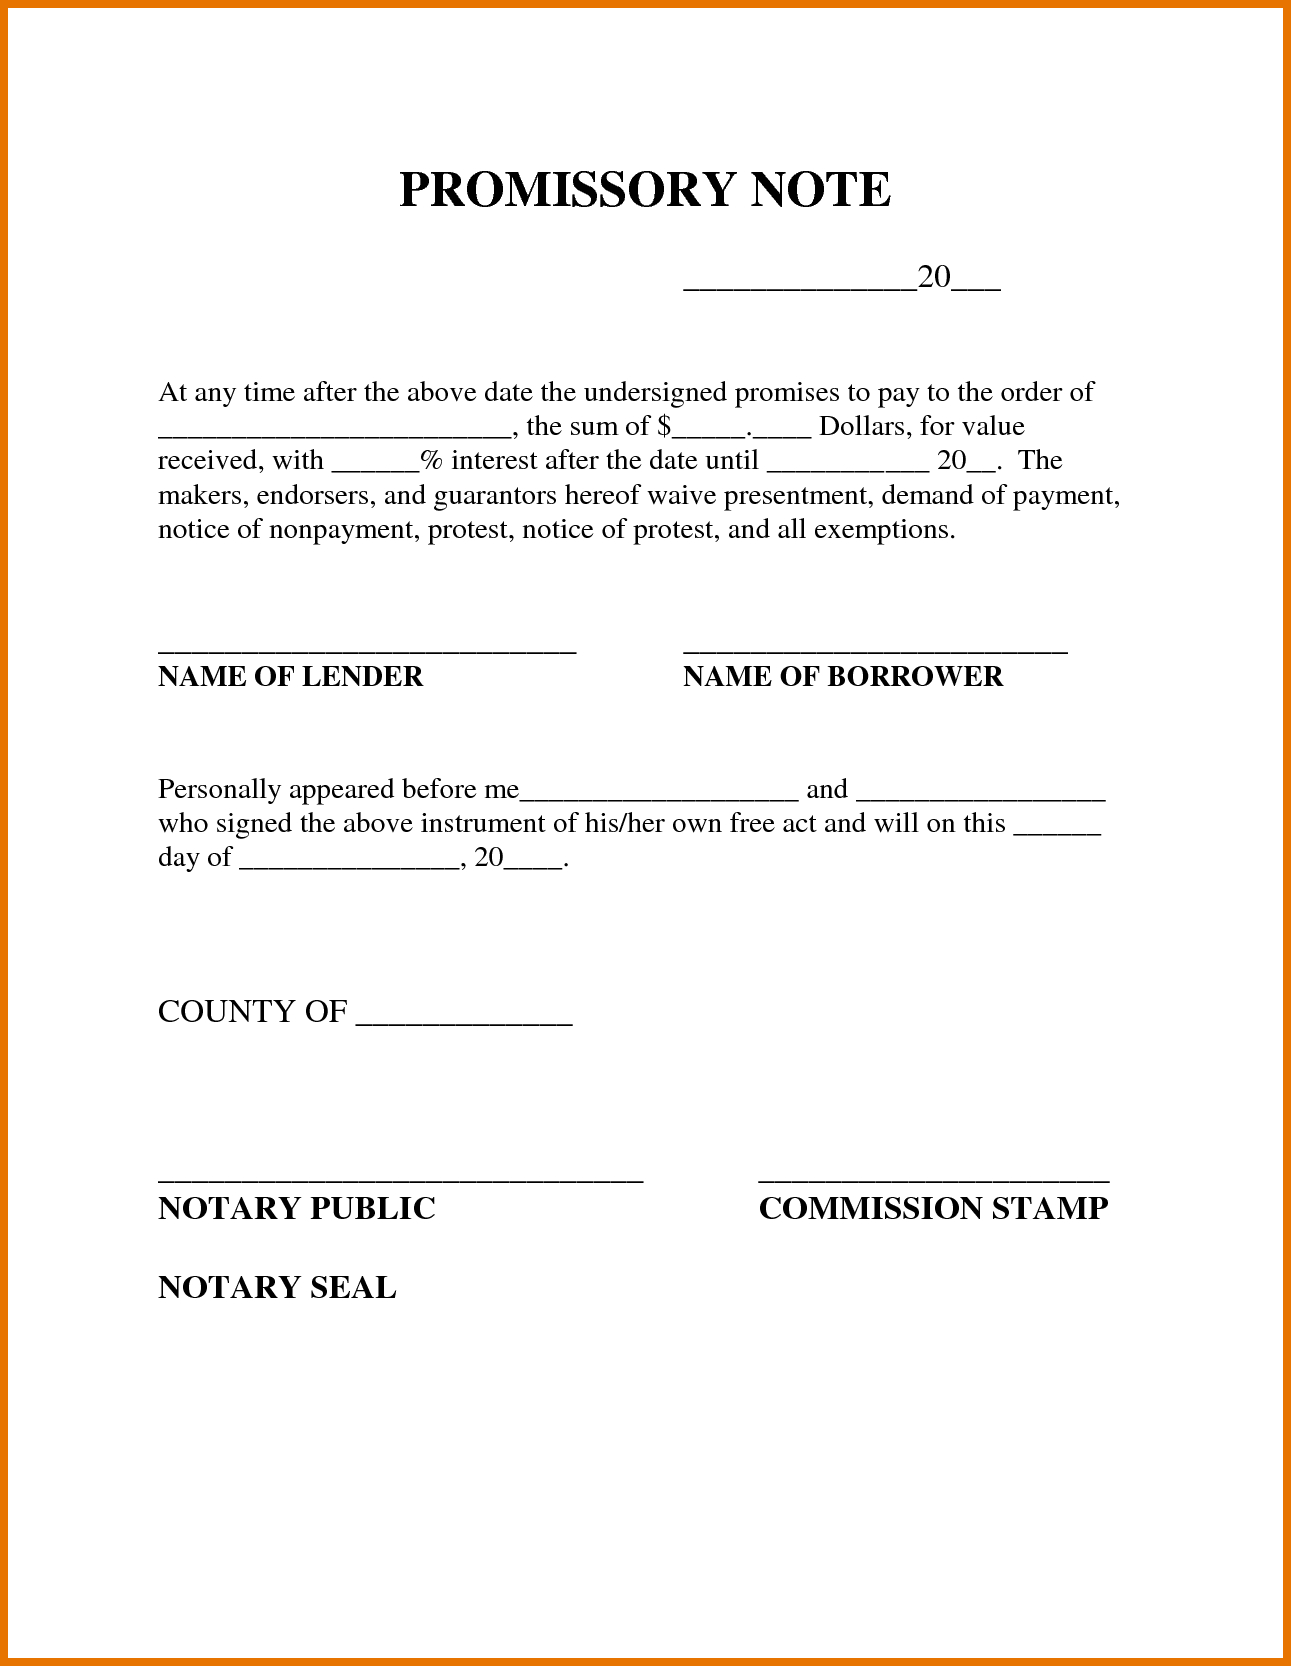 Free Printable Promissory Note Template : Violeet - Free Printable Promissory Note For Personal Loan